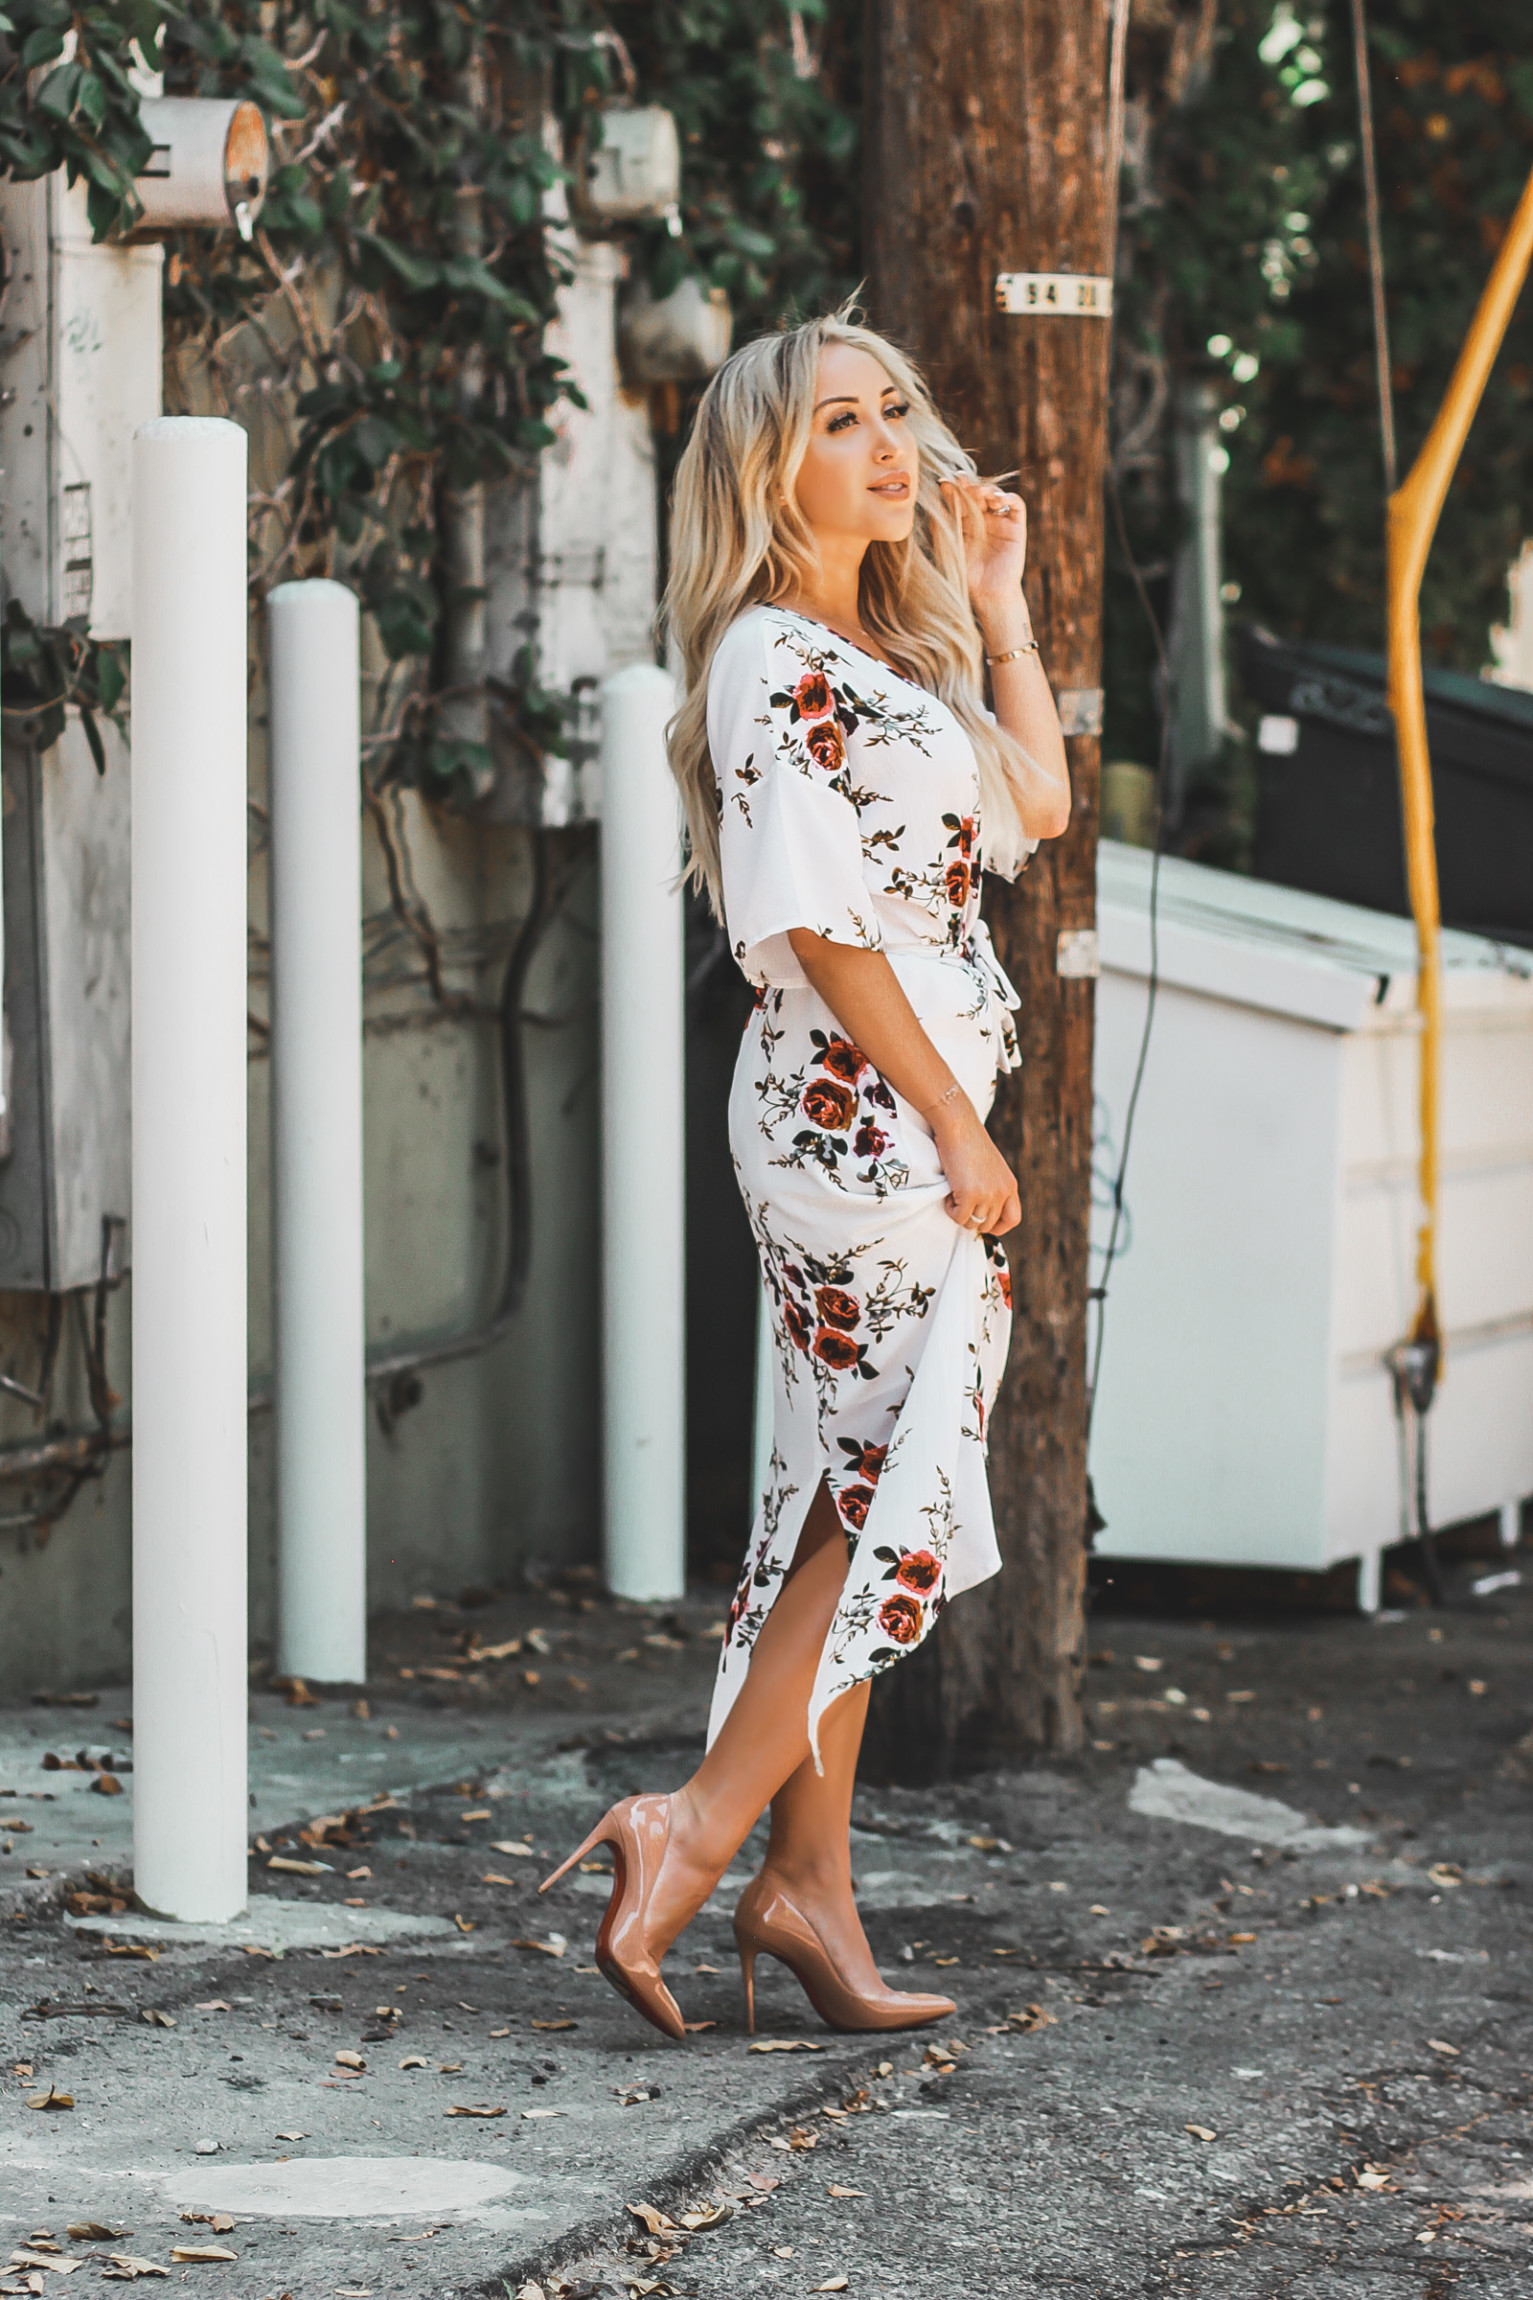 White Floral Dress | Summer Dresses | Summer Style | Blondie in the City by Hayley Larue